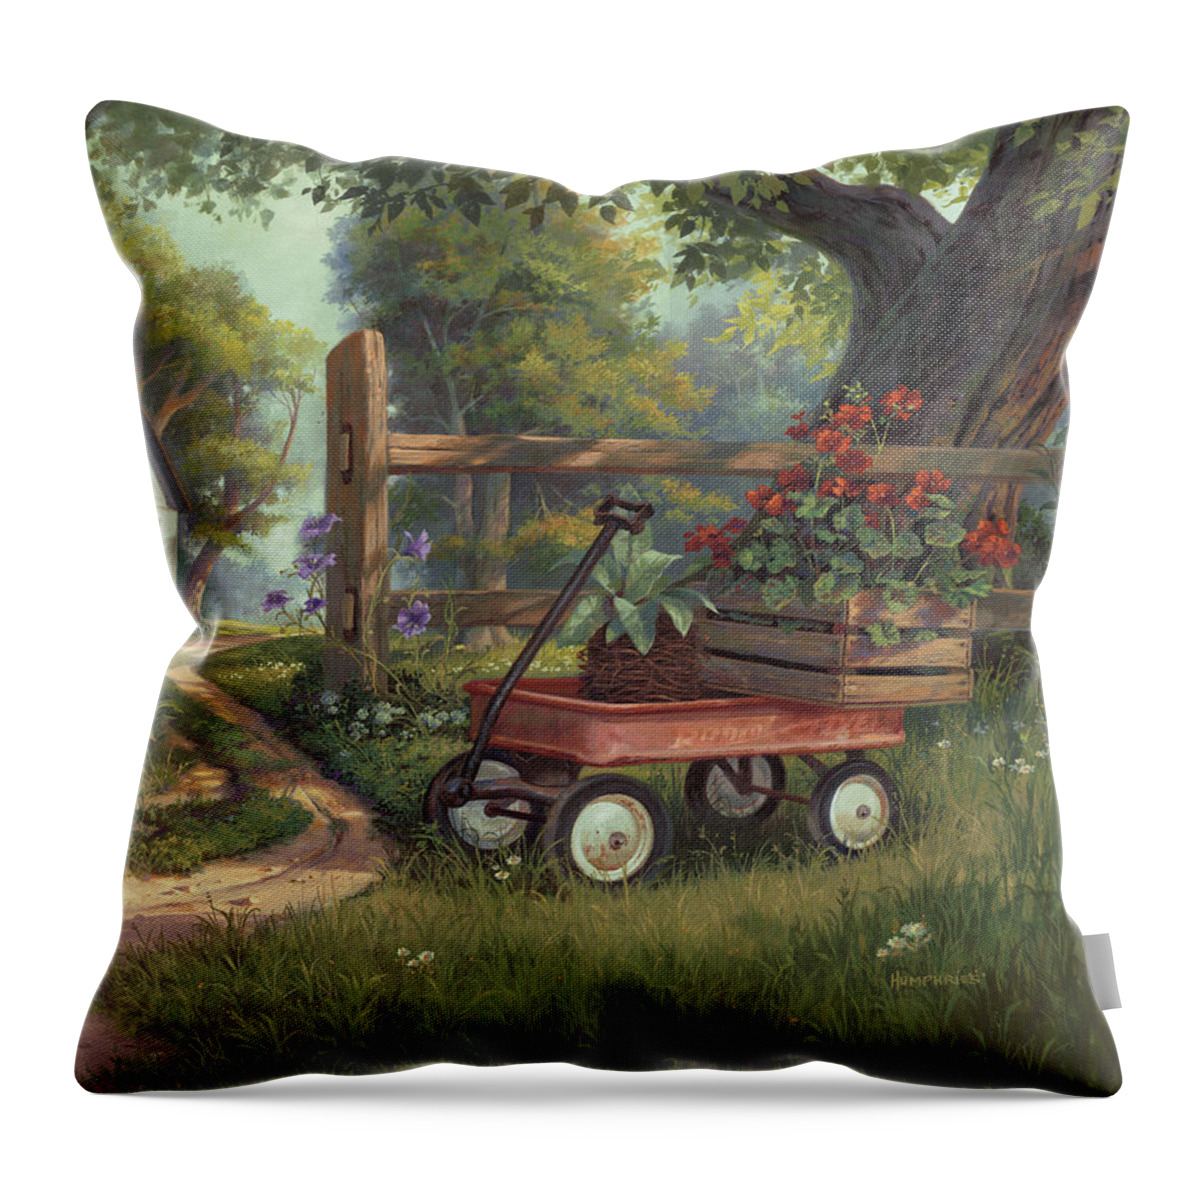 Michael Humphries Throw Pillow featuring the painting Red Accents by Michael Humphries